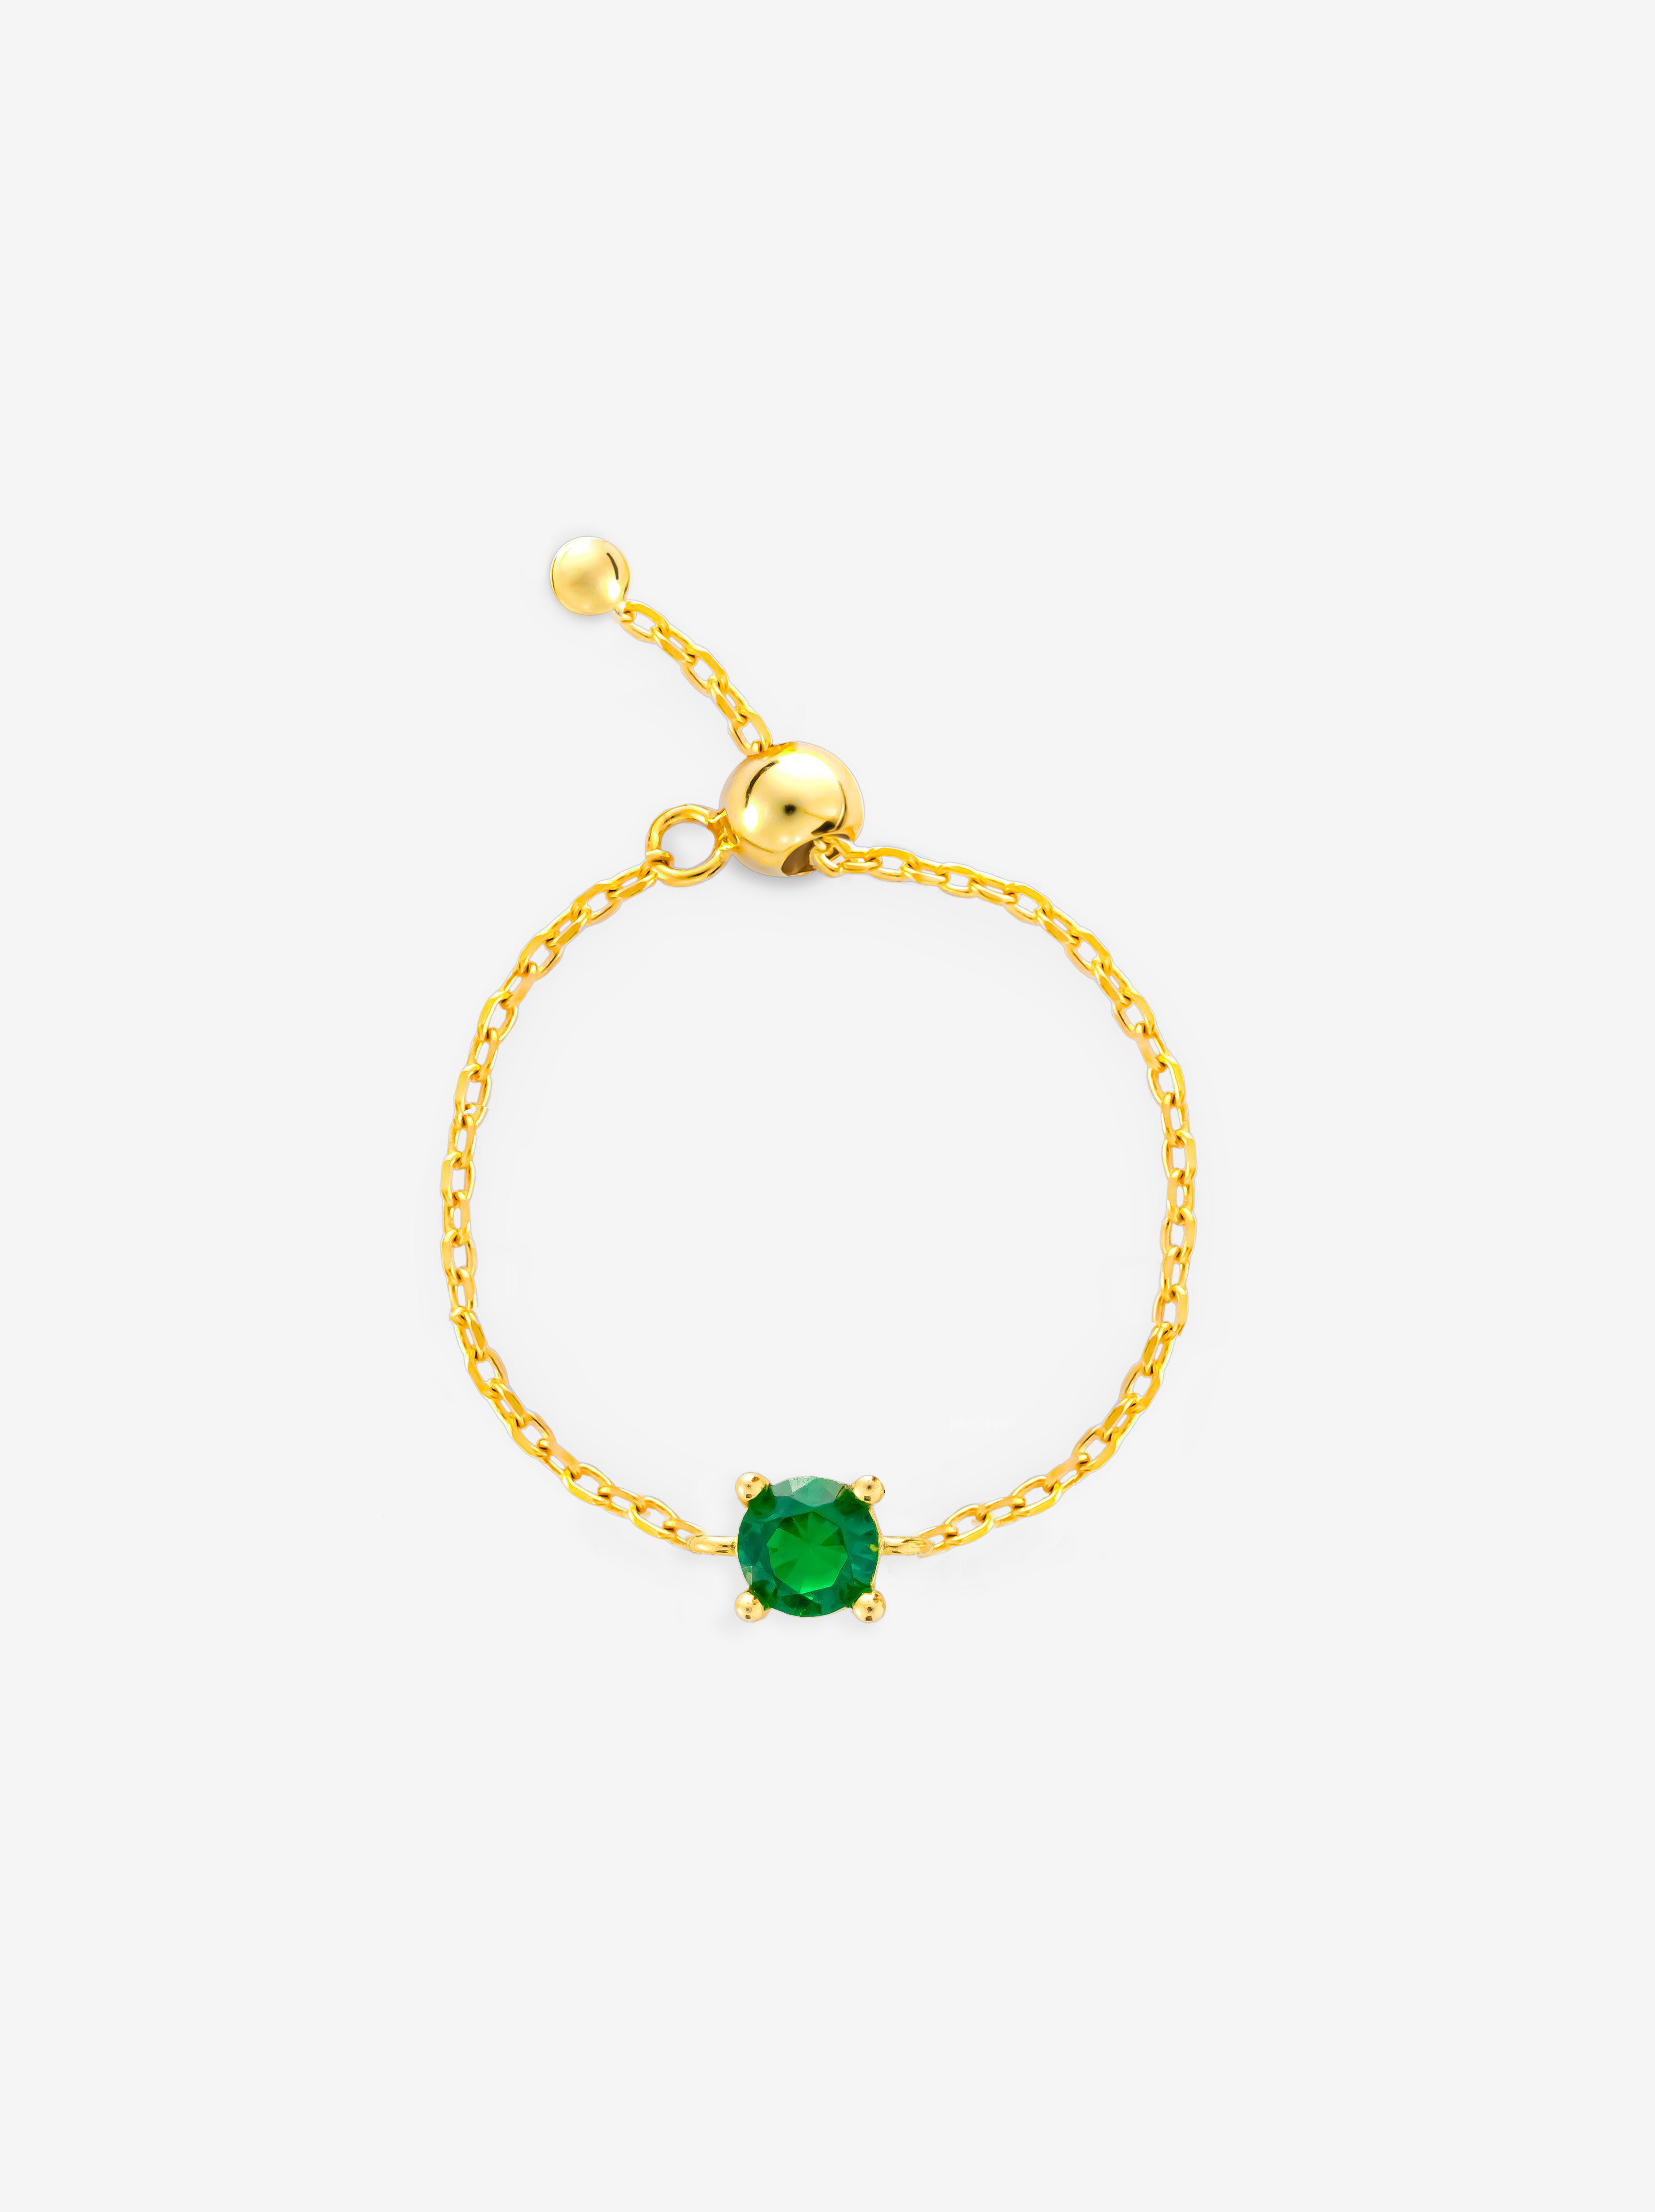 Gold Adjustable Chain Ring - Round Stone